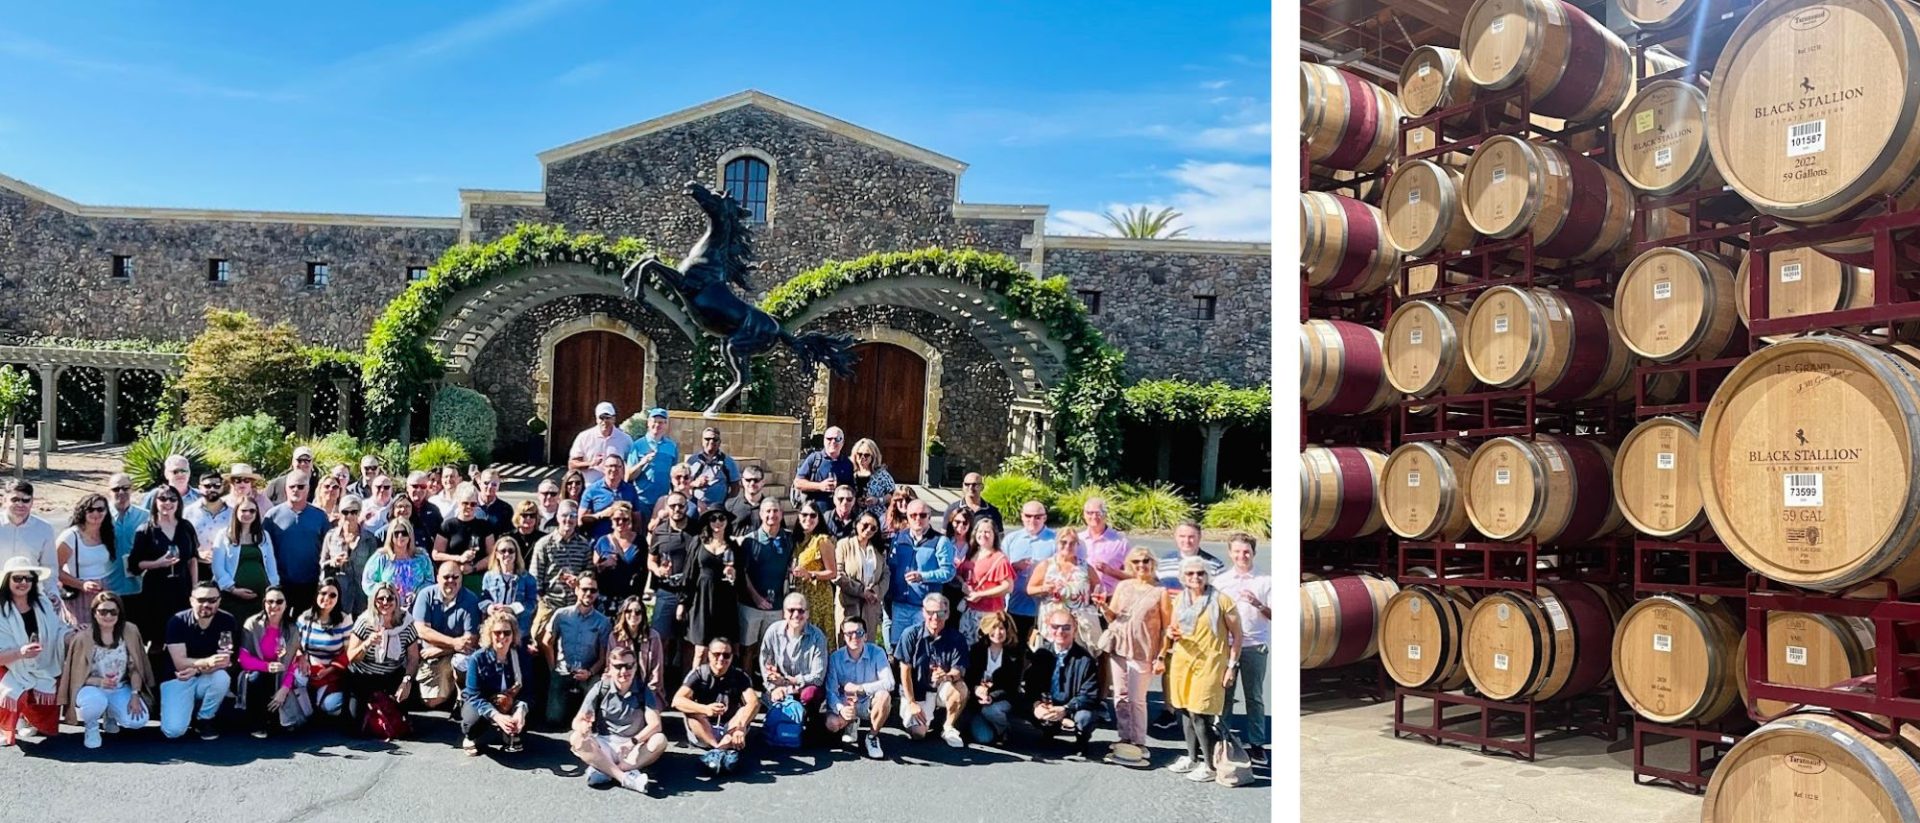 A group of people posing in front of wine barrels.